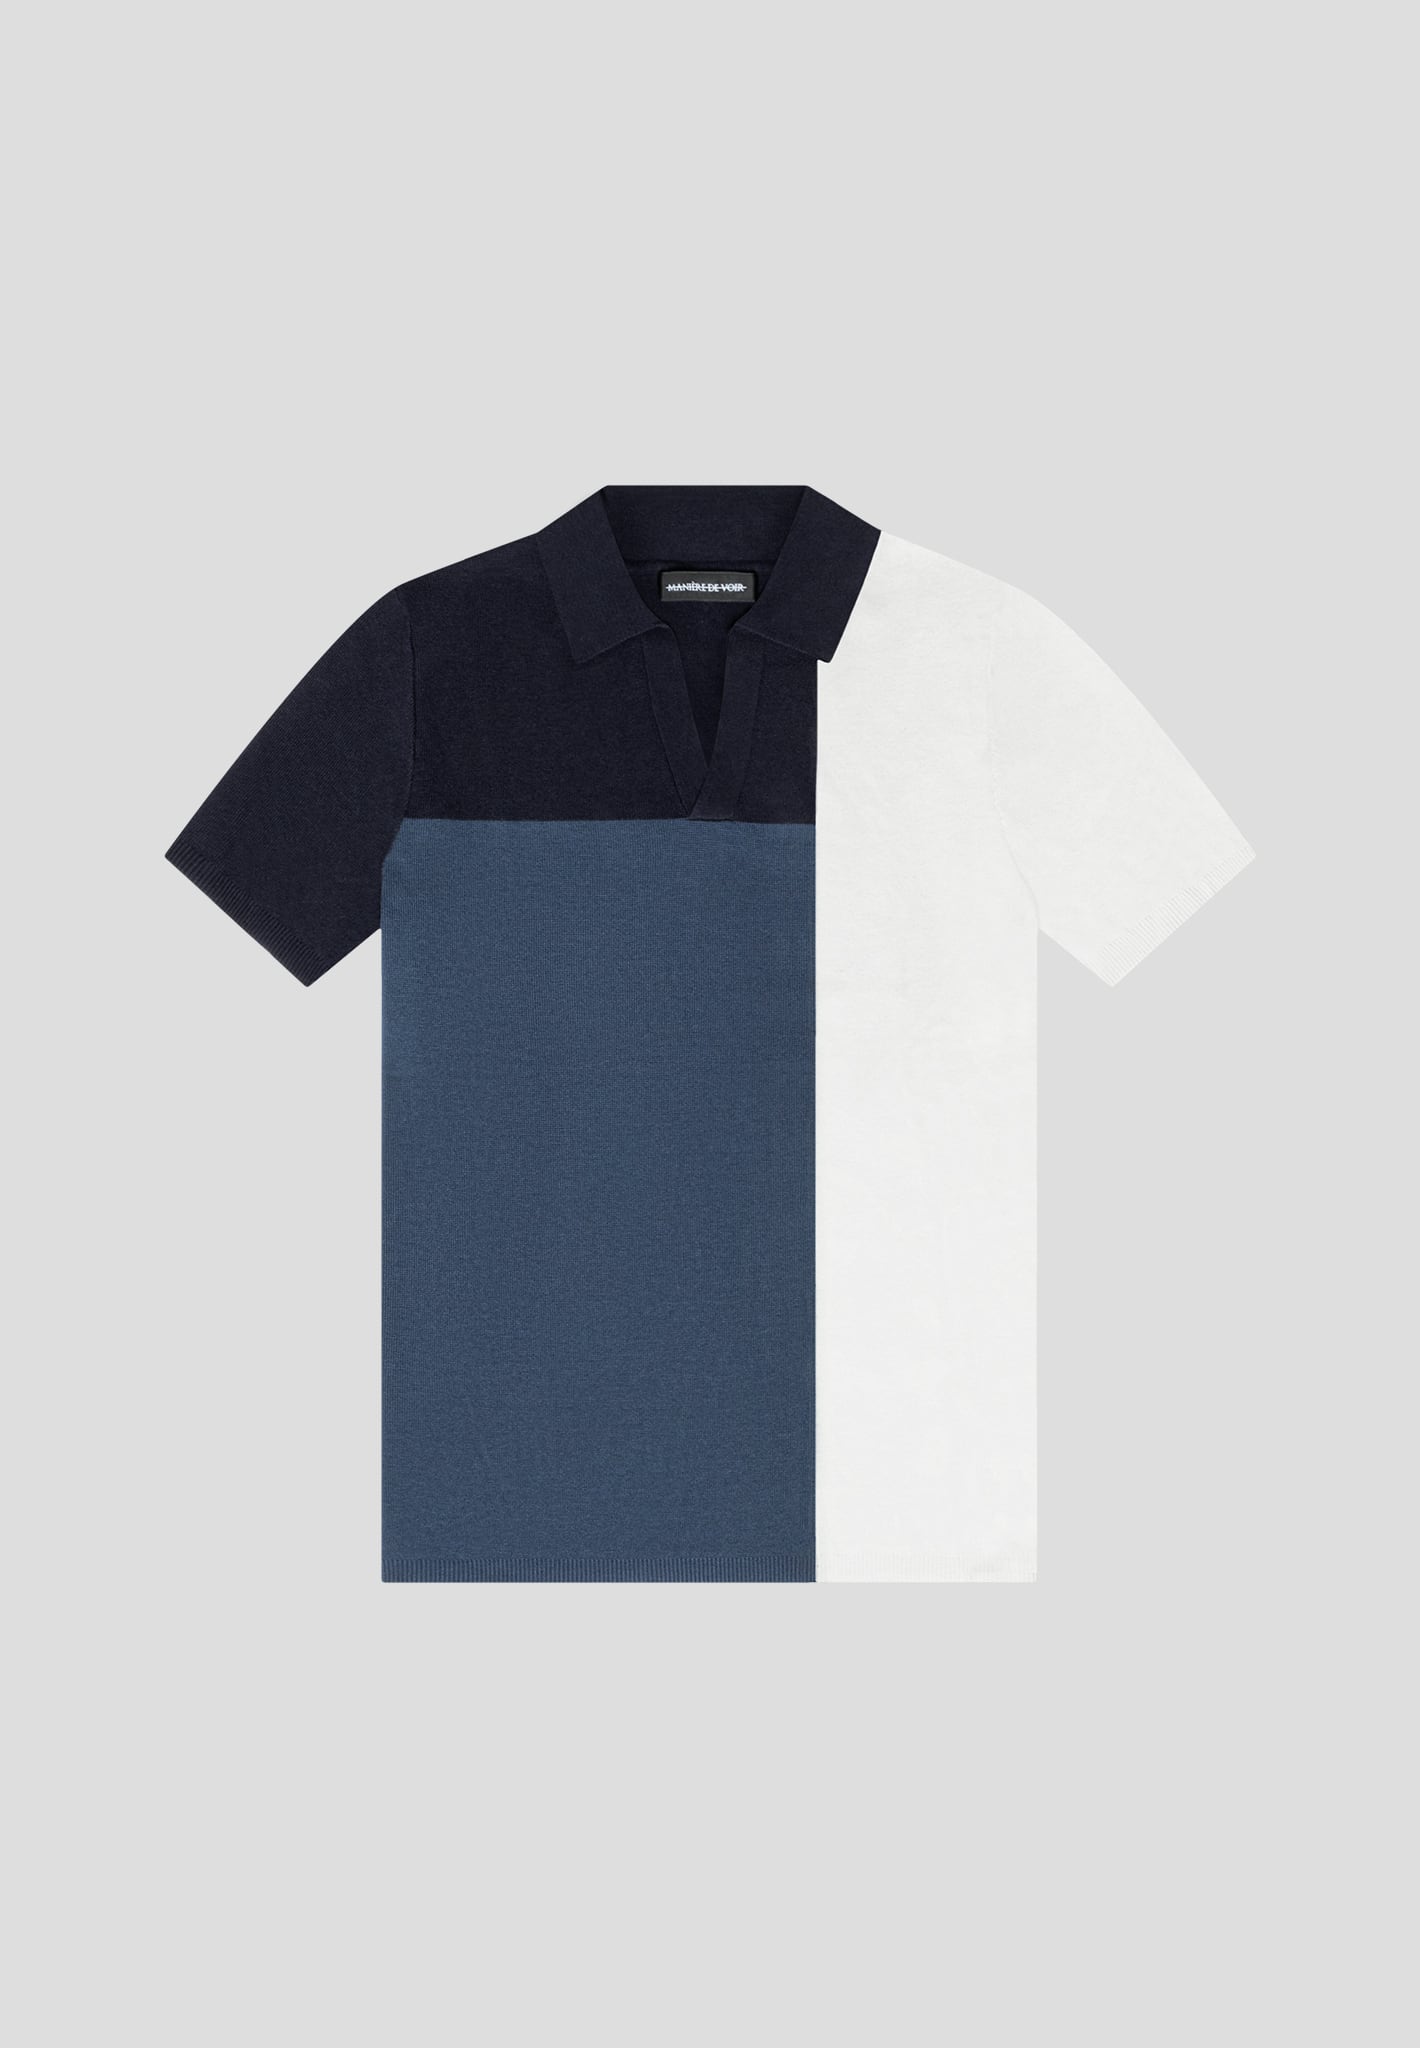 Colour Block Knit Revere Polo Top - Navy/Steel Blue